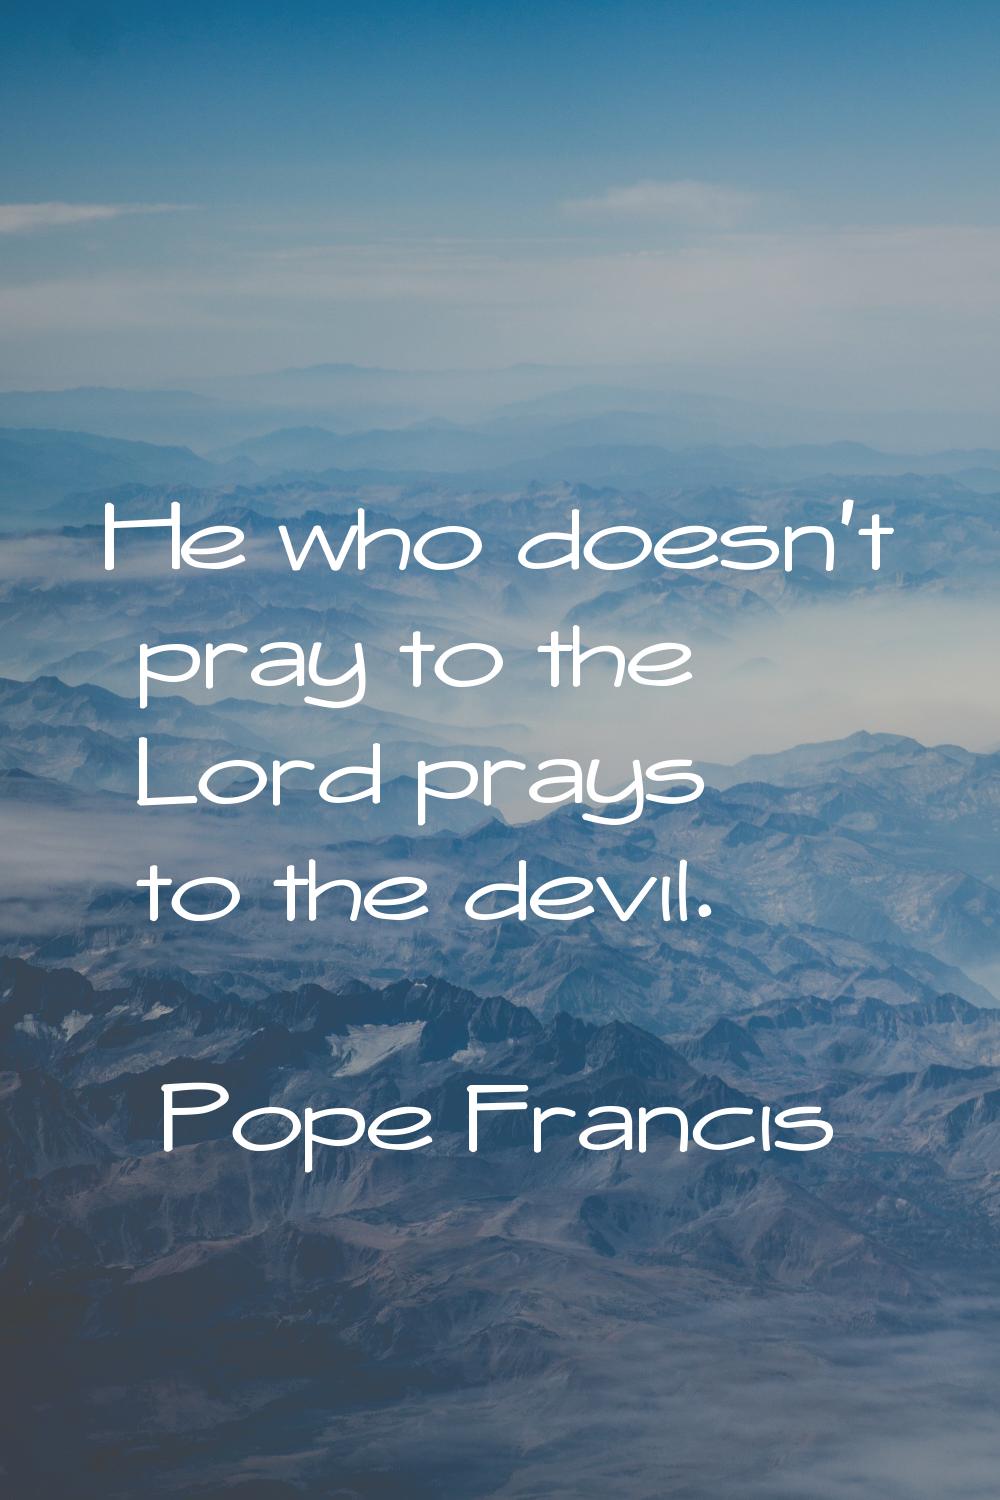 He who doesn't pray to the Lord prays to the devil.